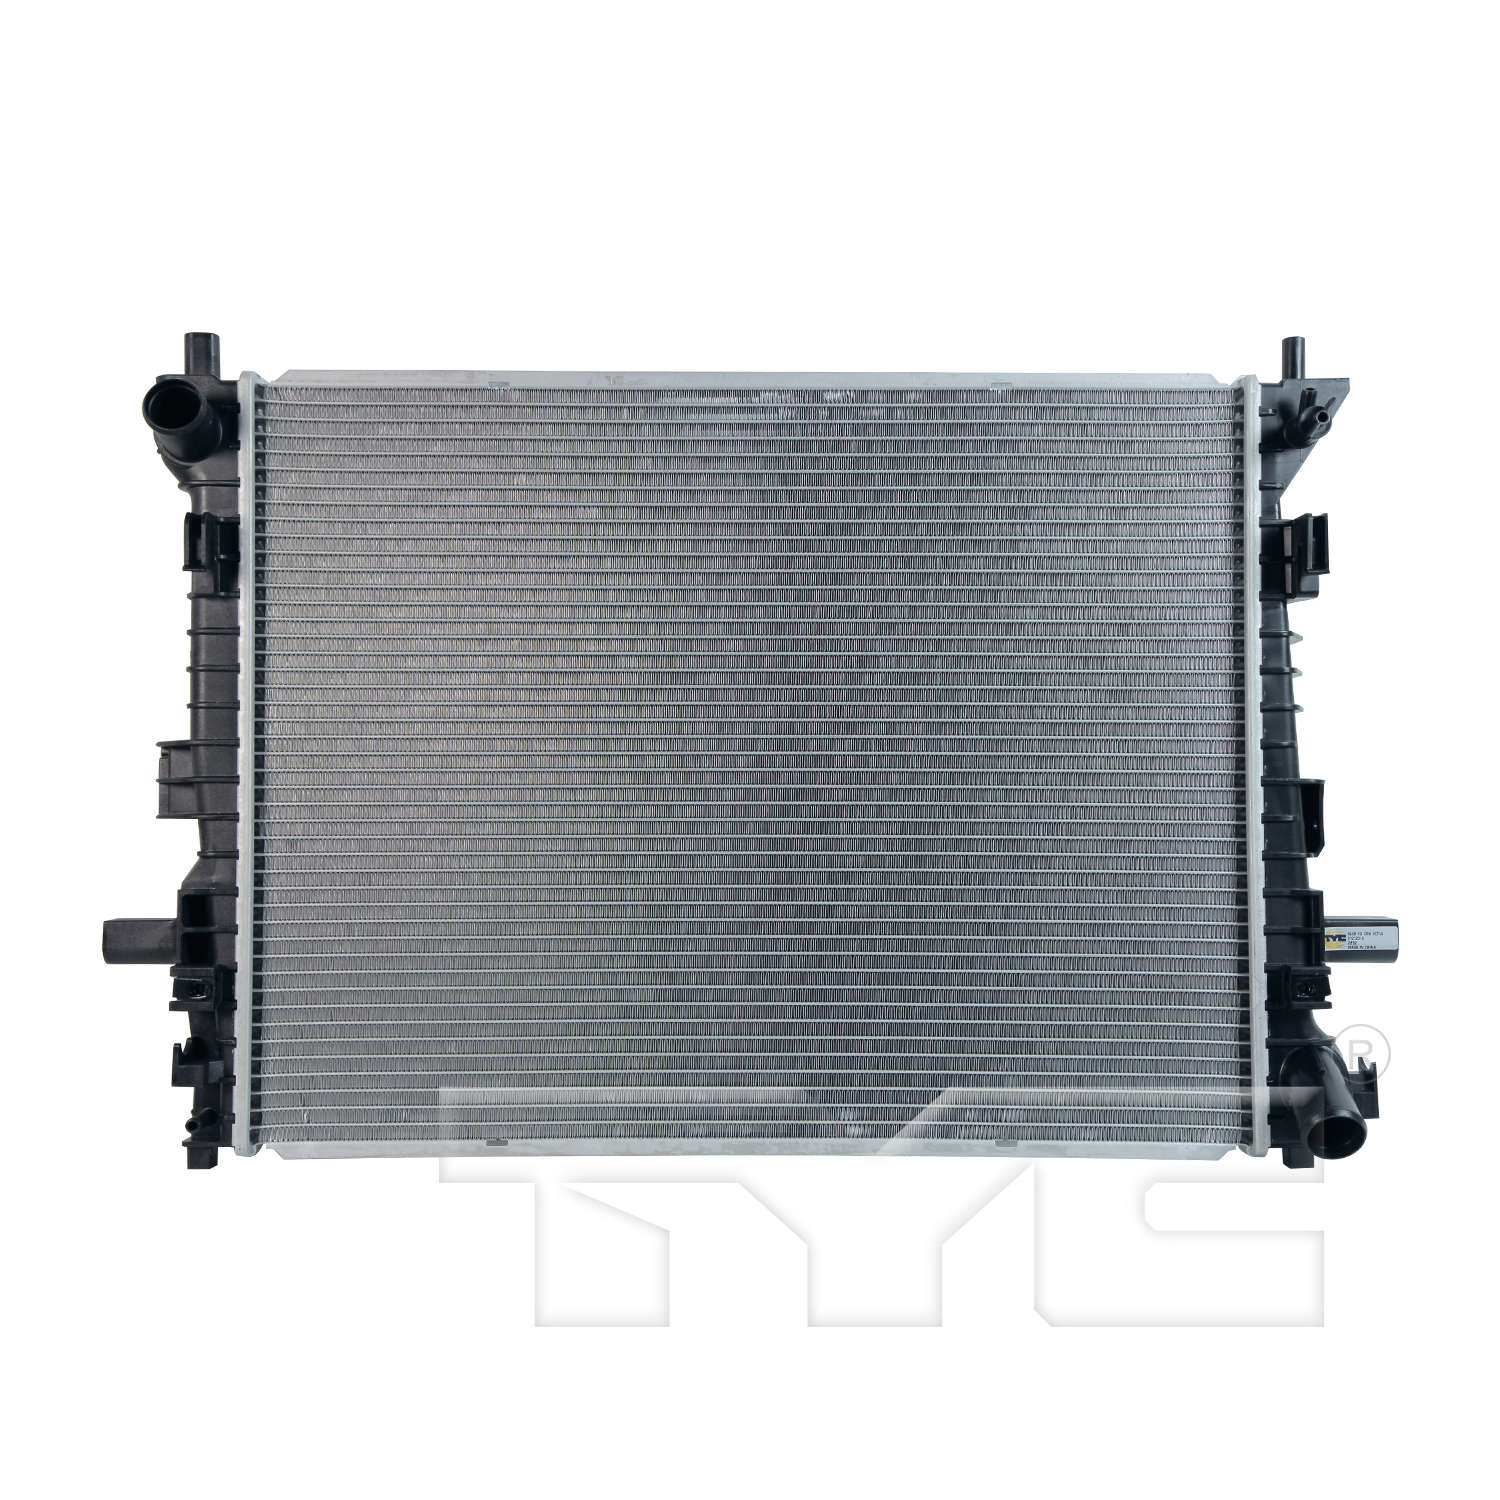 Aftermarket RADIATORS for MERCURY - GRAND MARQUIS, GRAND MARQUIS,06-11,Radiator assembly